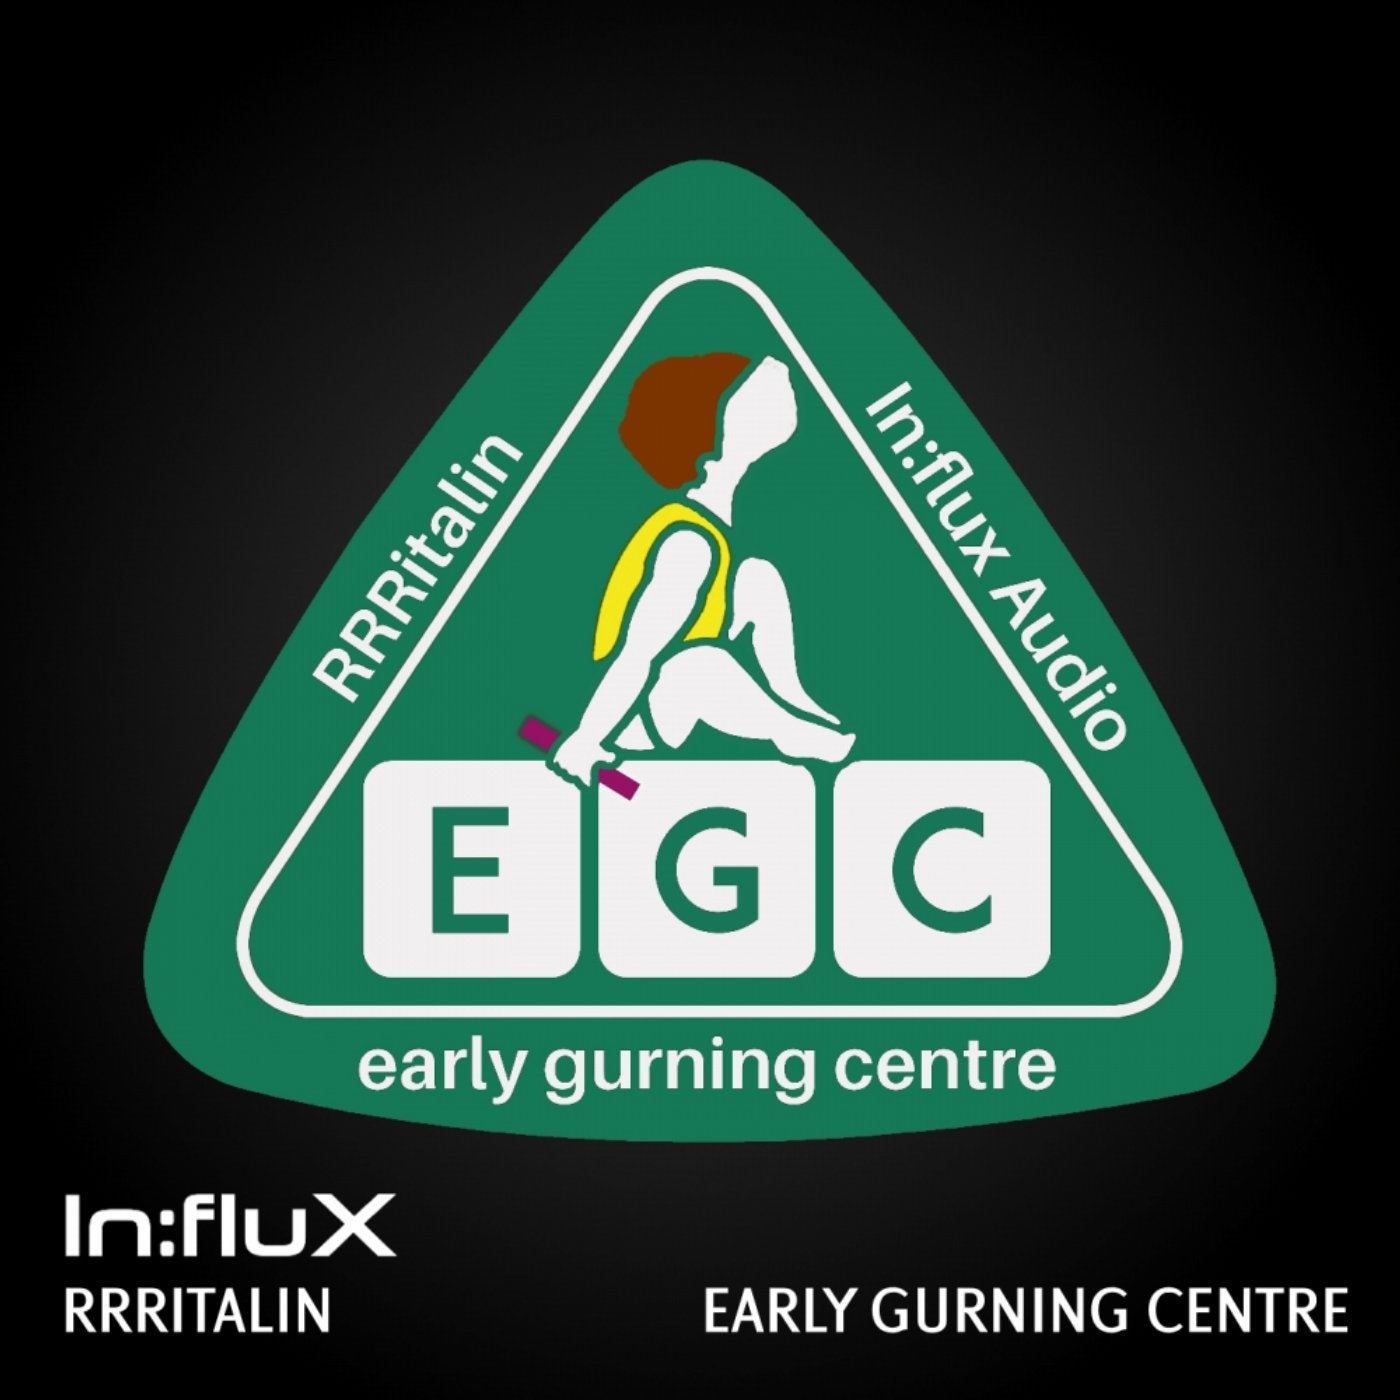 Early Gurning Centre